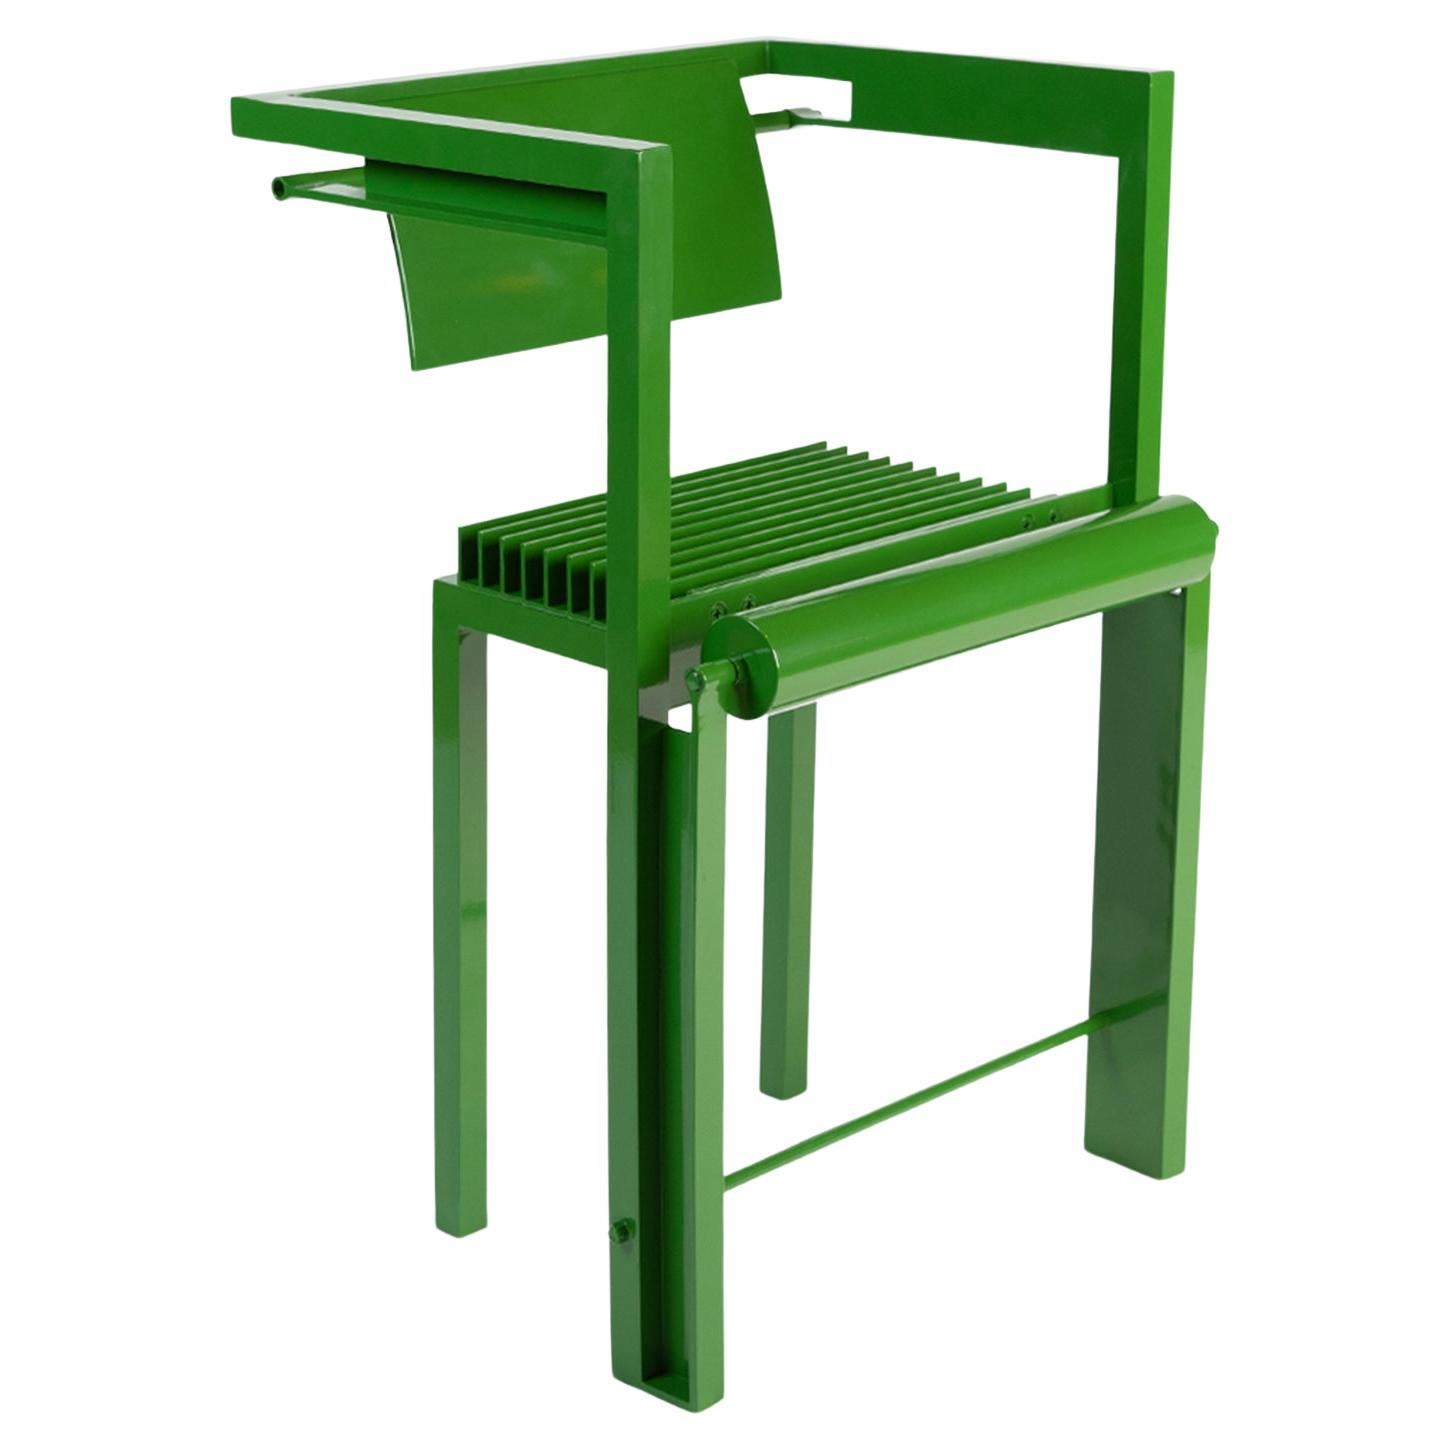 Robert Whitton Architectural One-Off Chair in Green